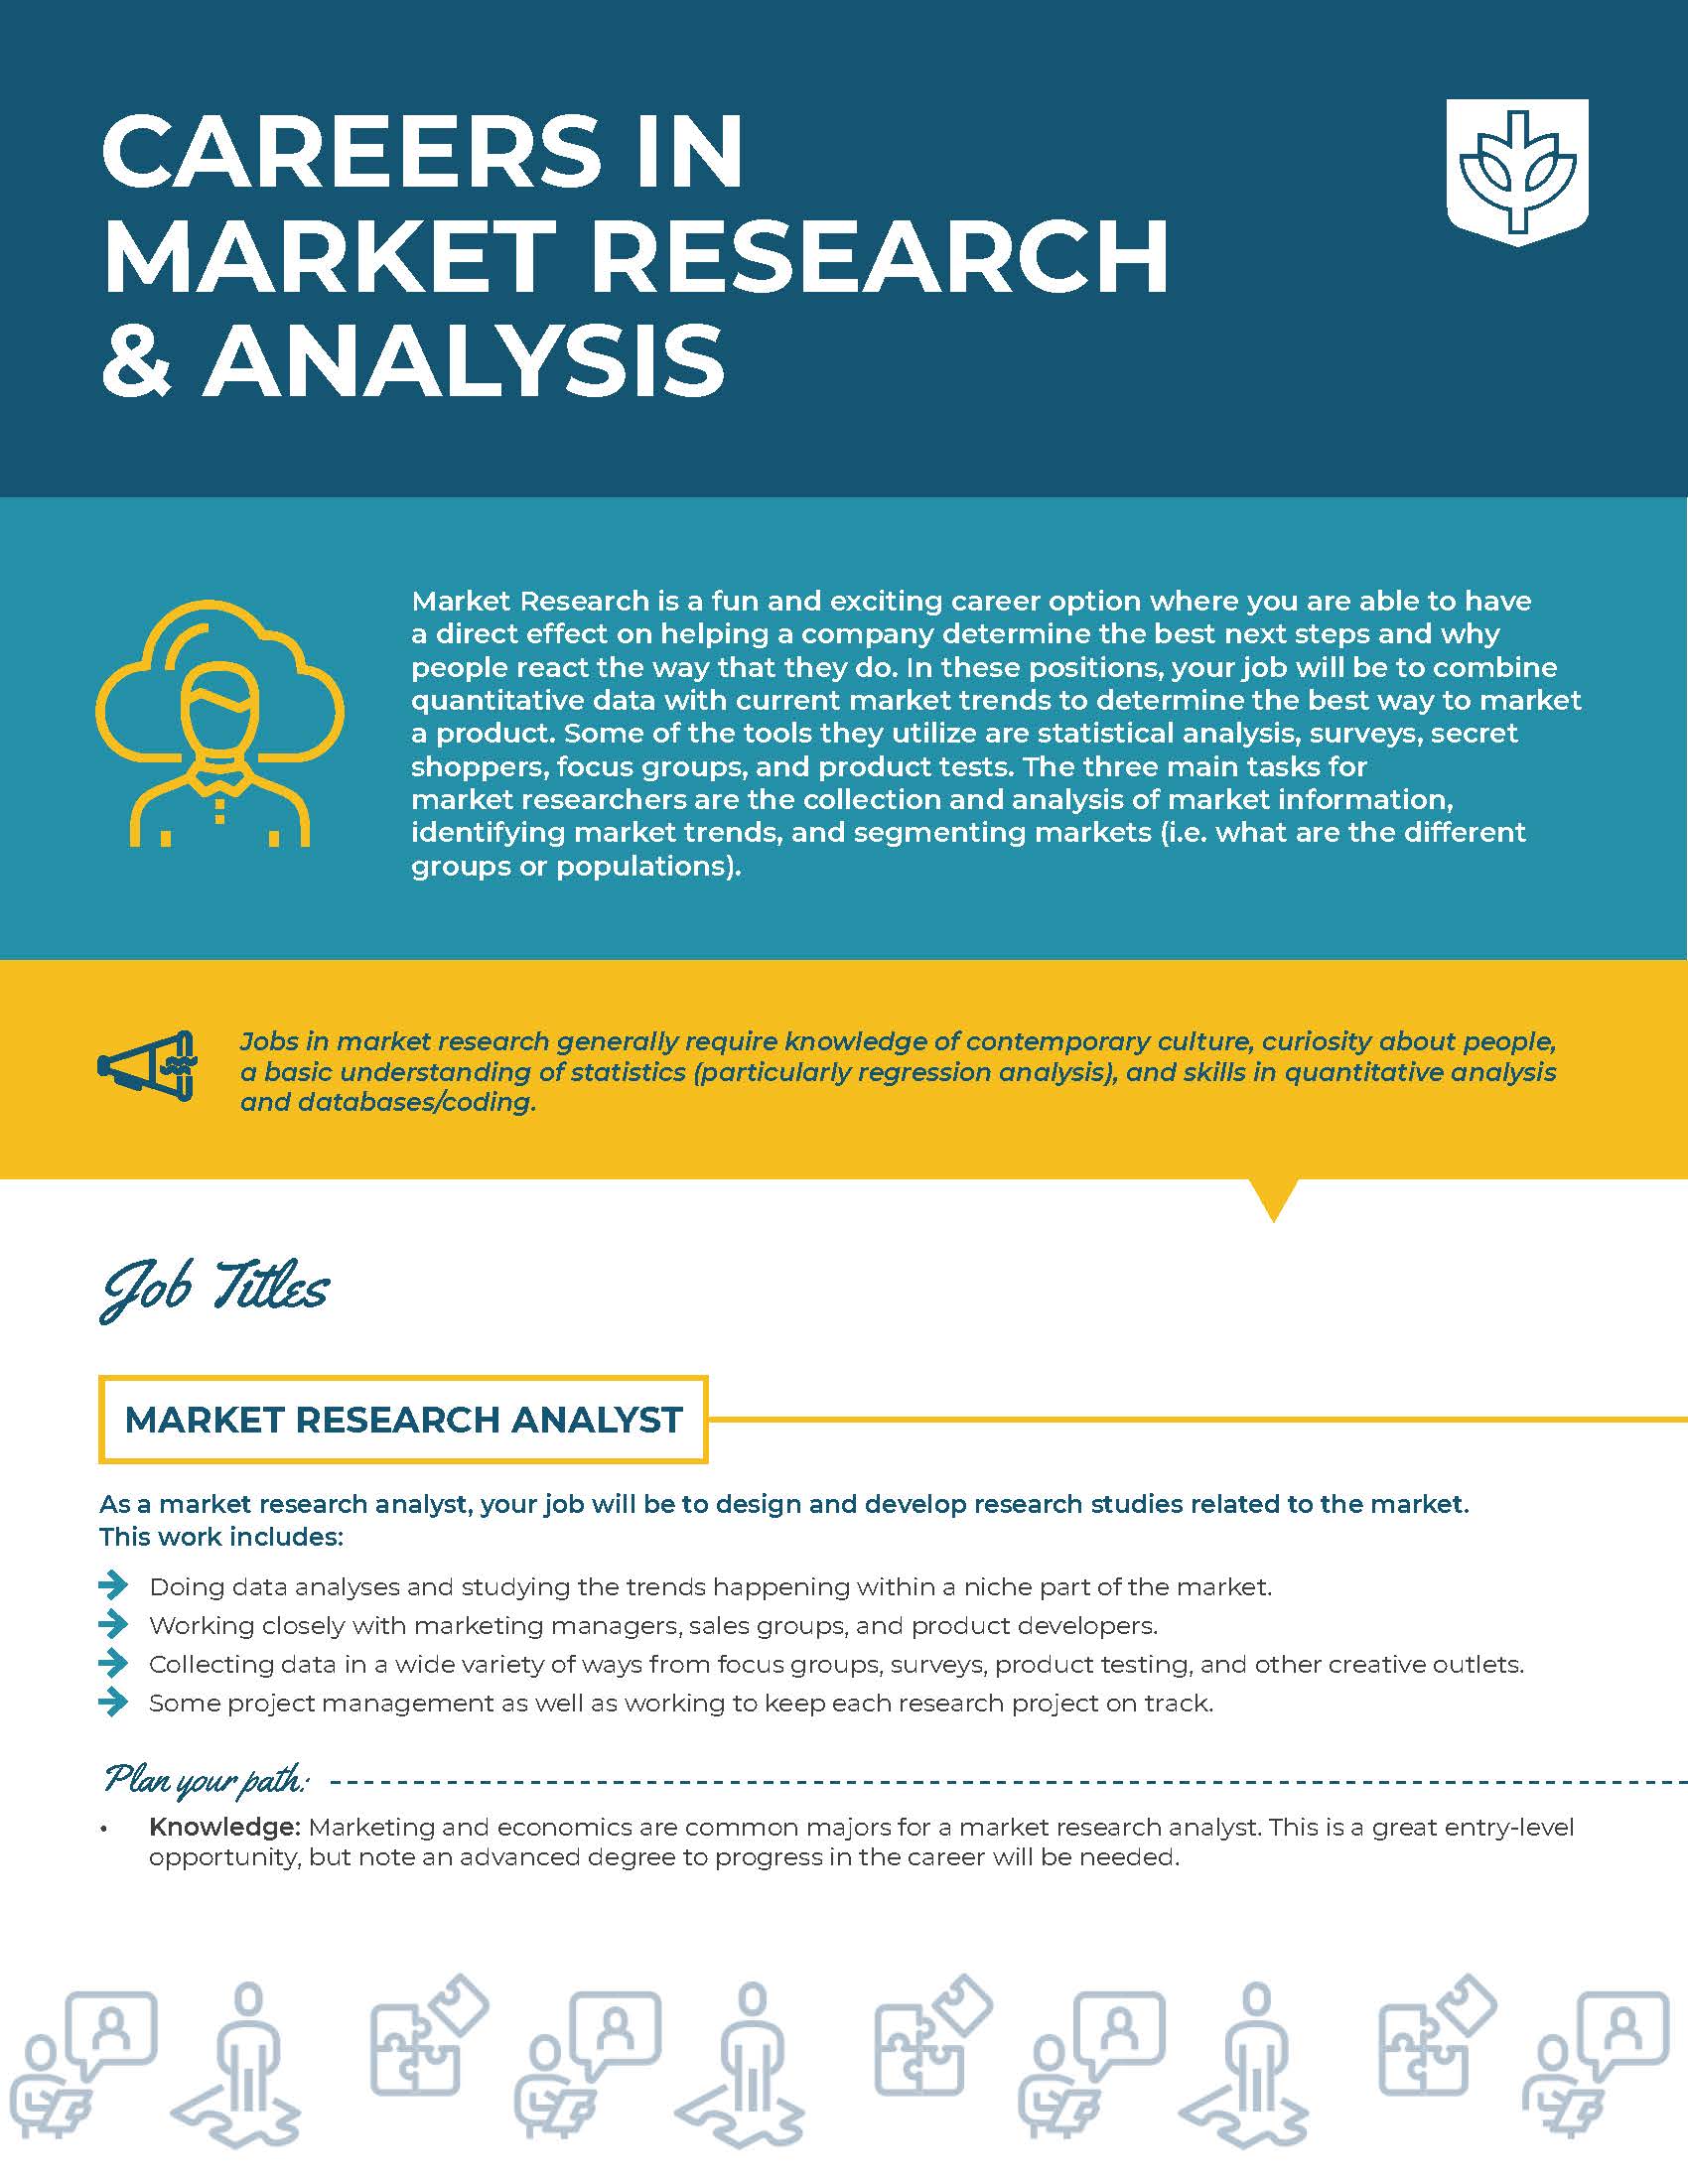 Careers in Market Research